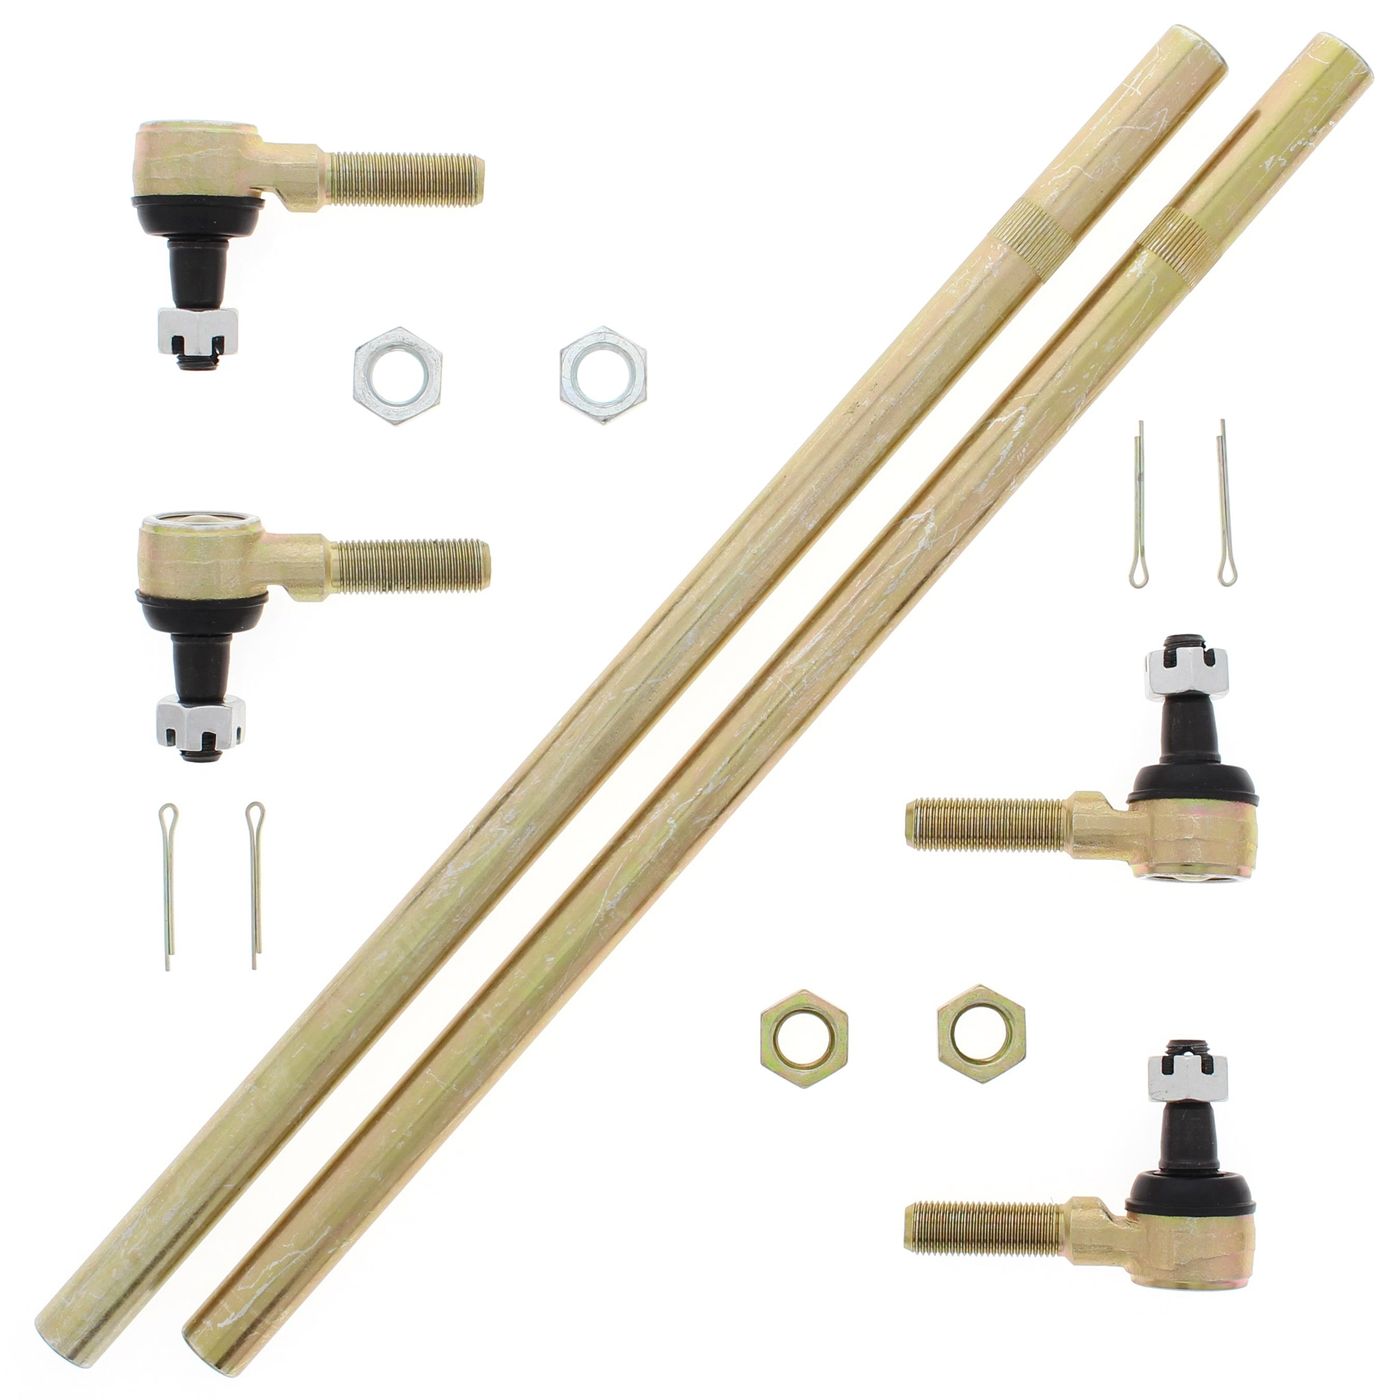 Wrp Tie Rod Kits - WRP521023 image